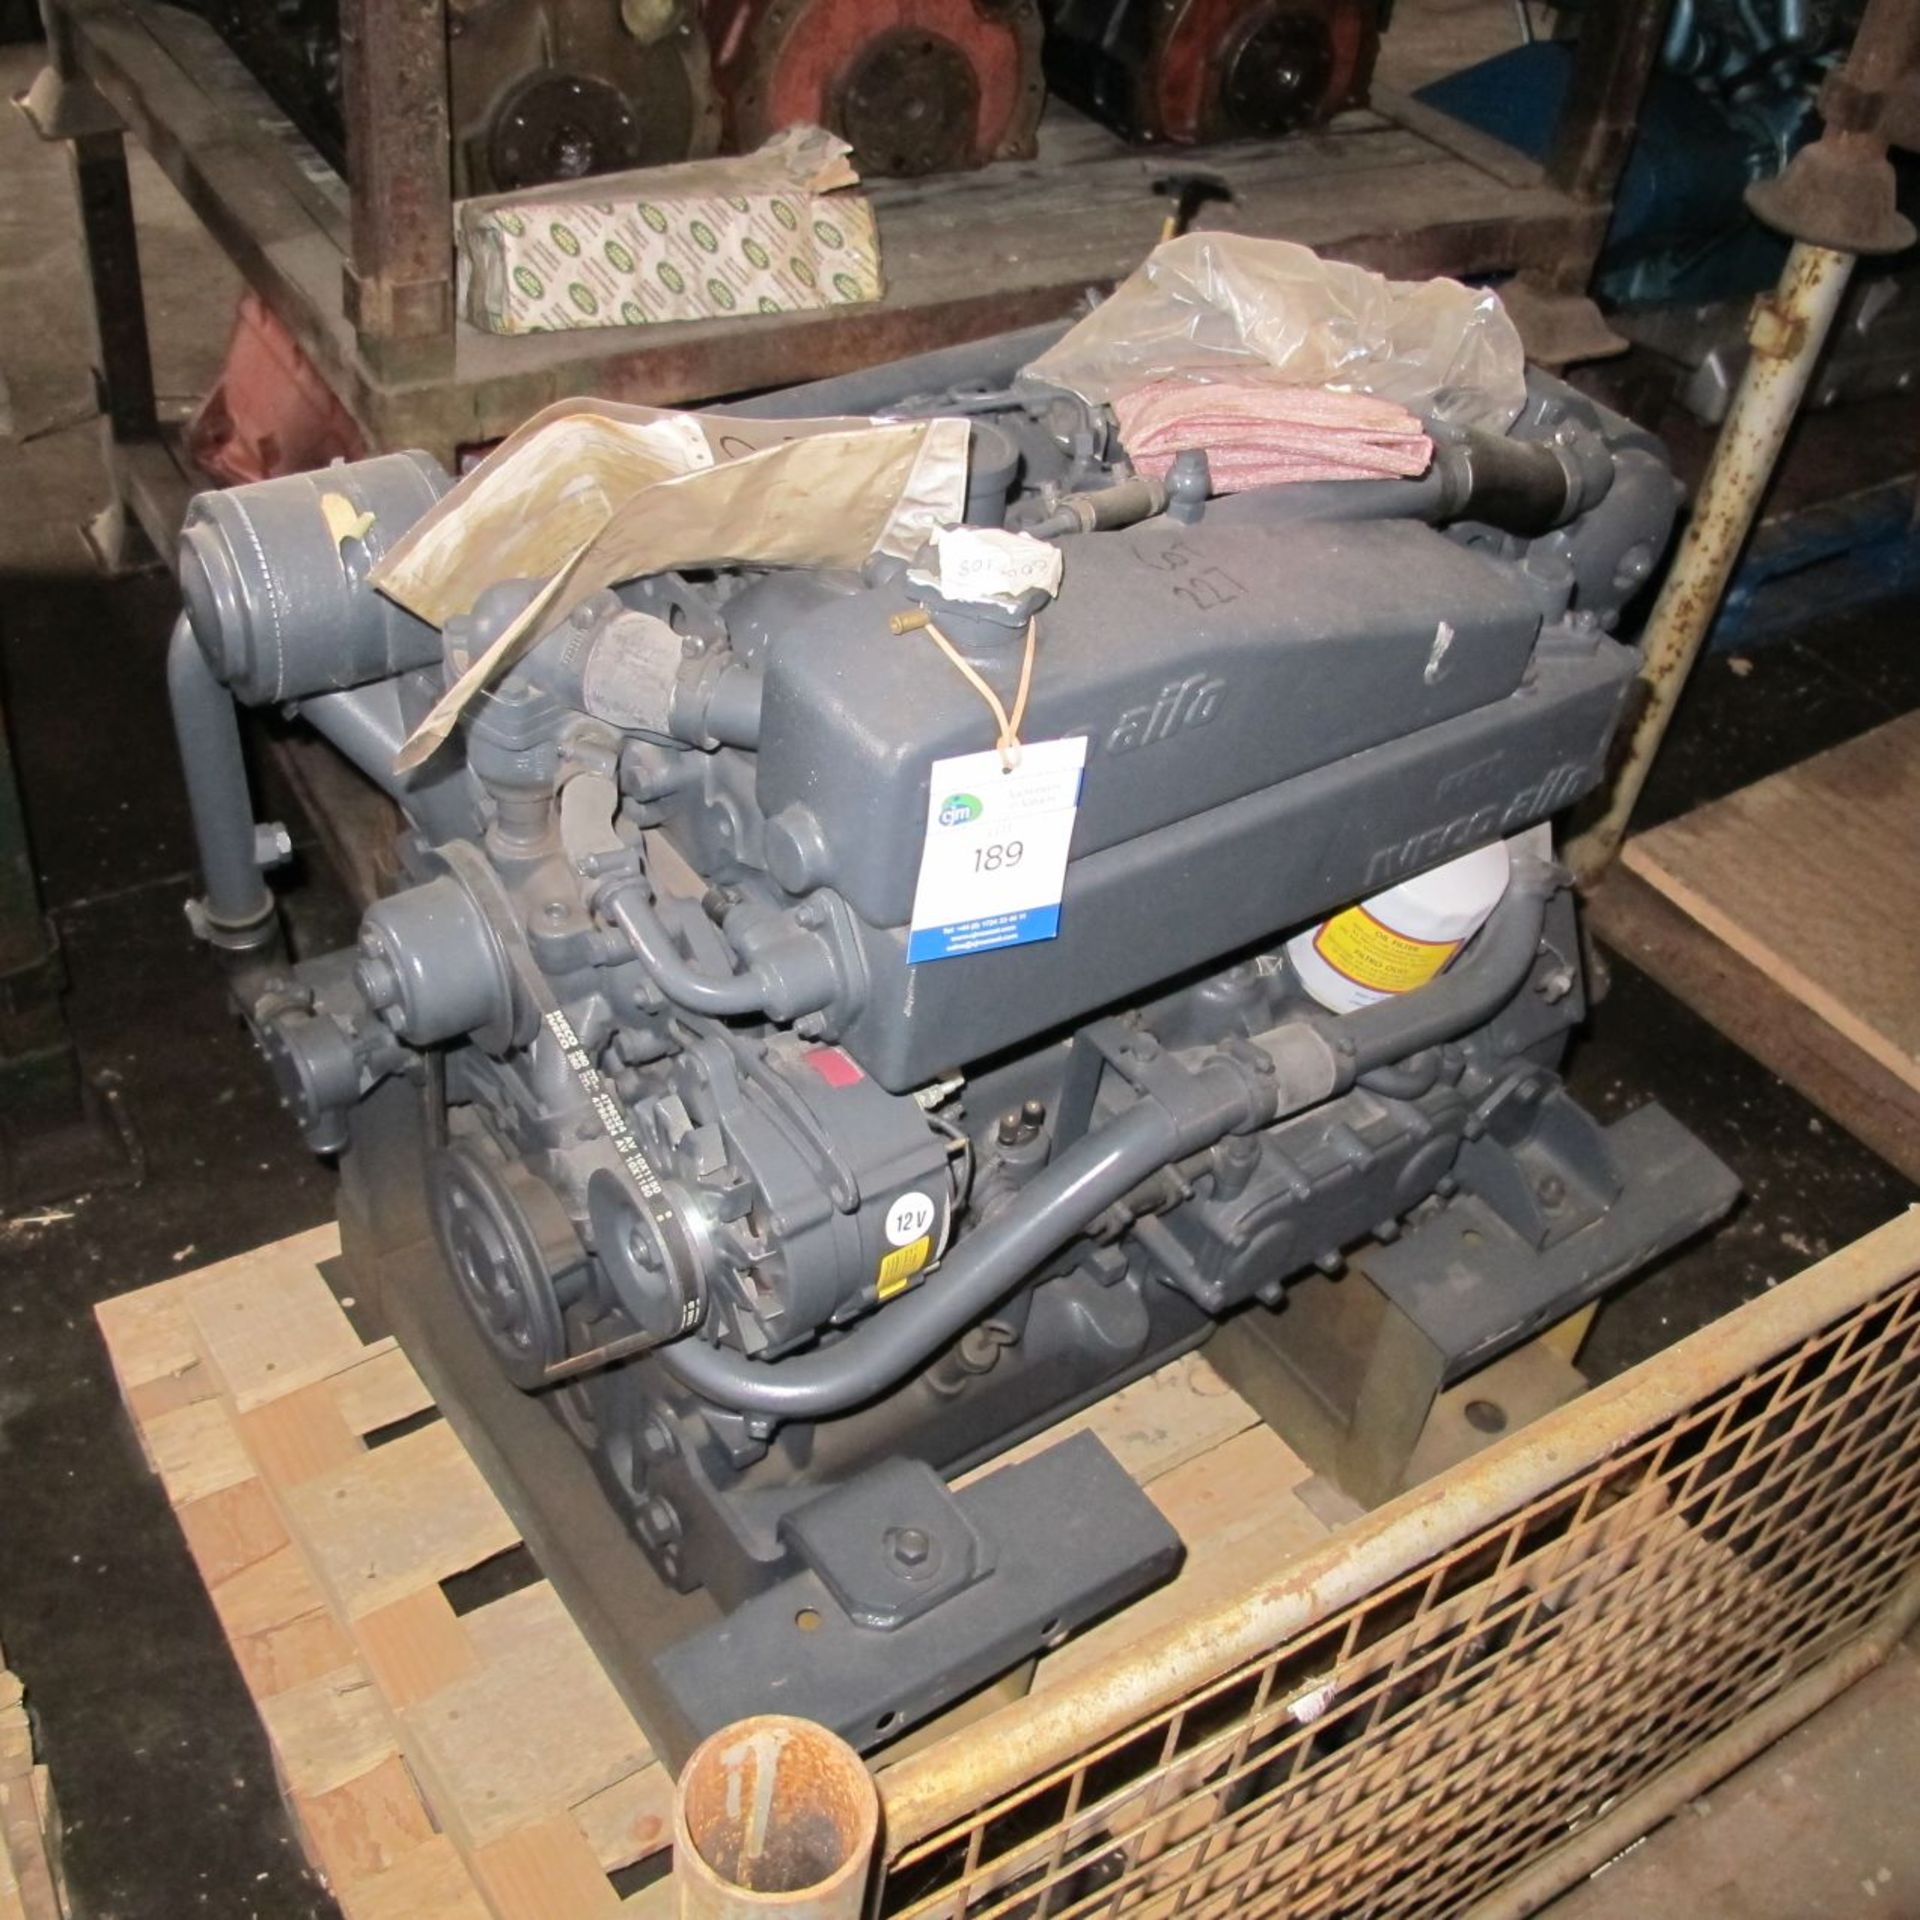 * Diesel Engine Marine Iveco 8045M08 4cyl non turbo, new, 76hp @ 2500rpm